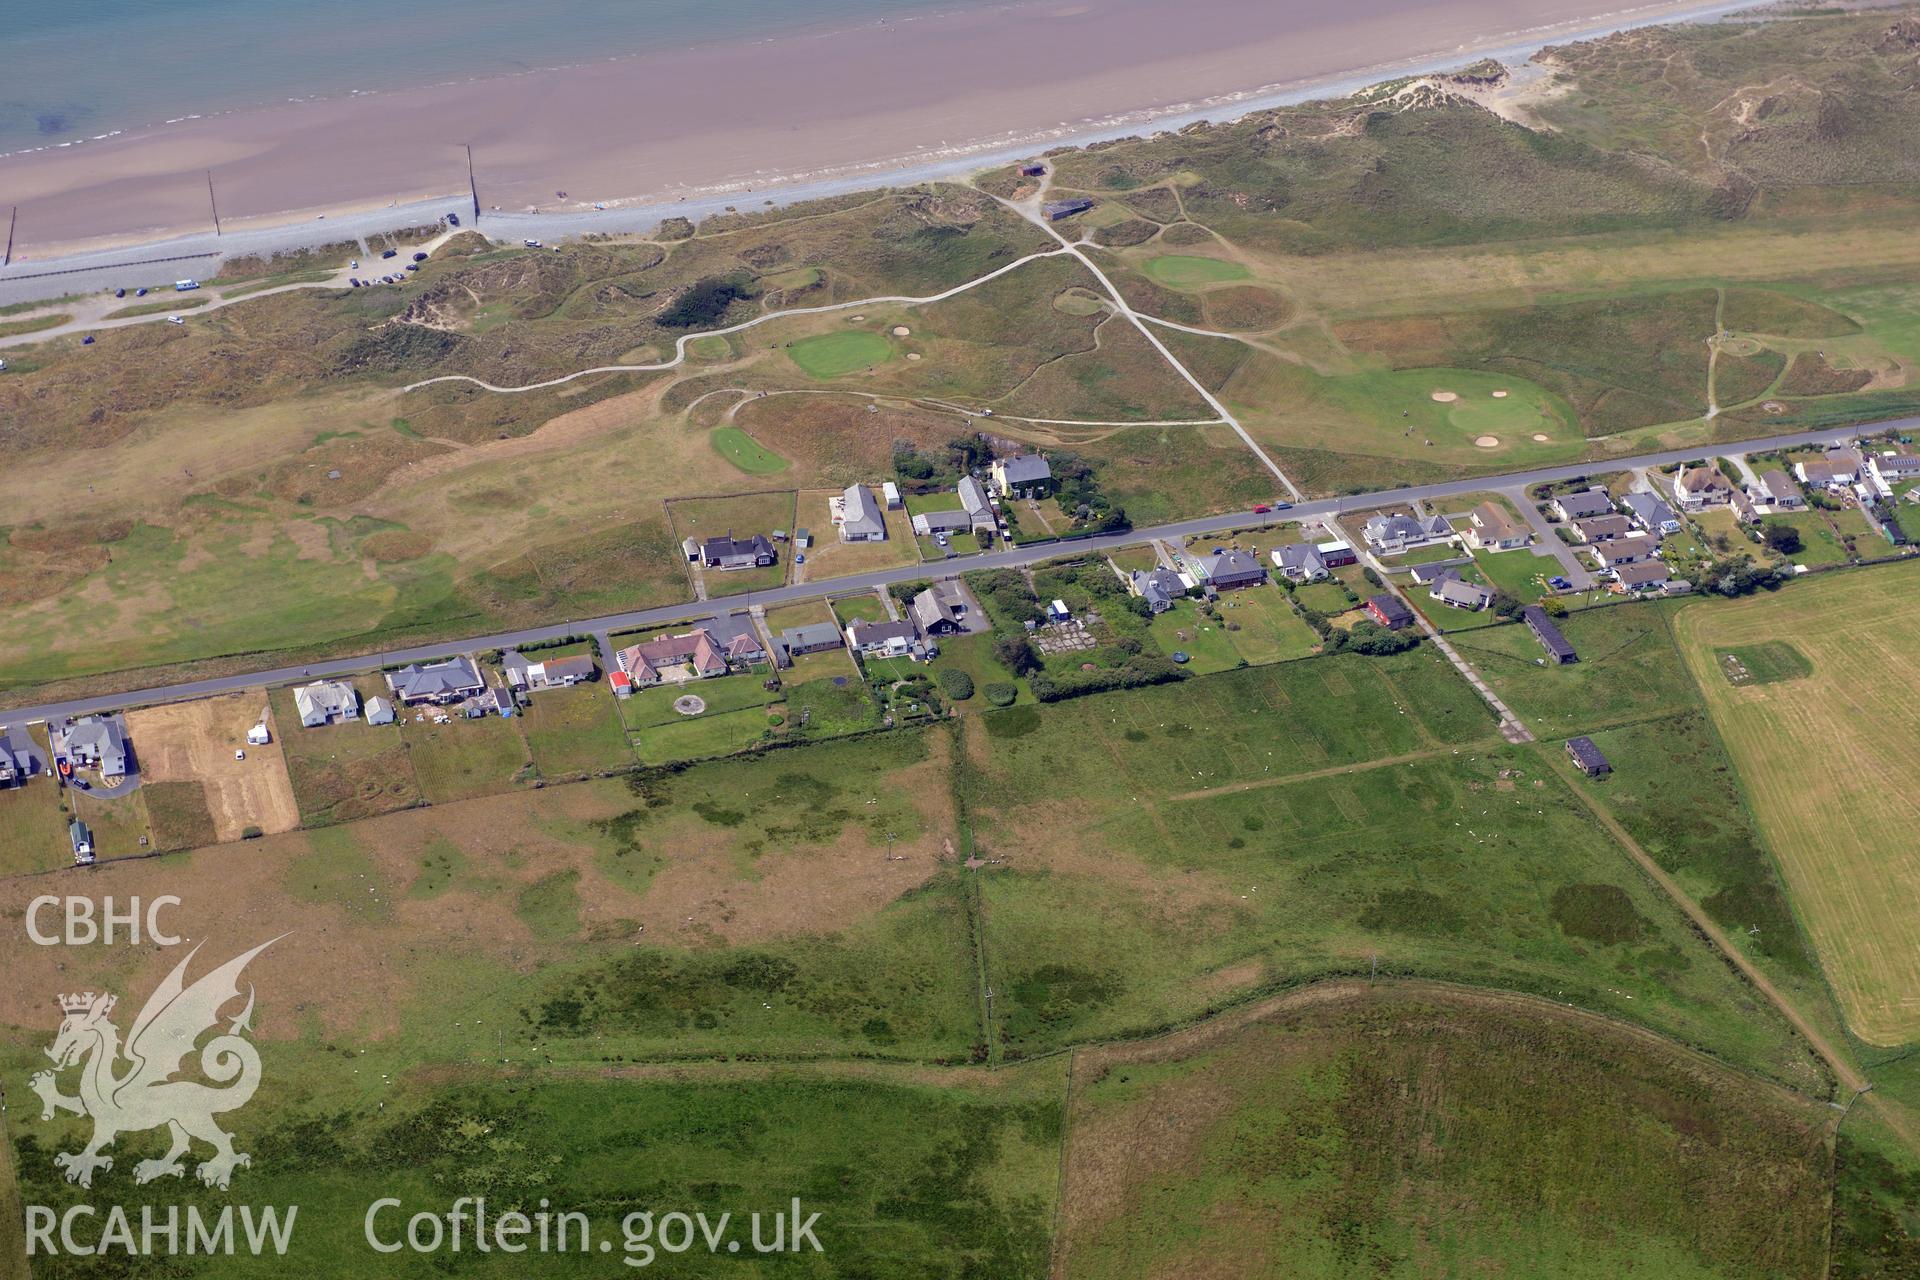 Ynyslas rocket range and the village of Ynys Las, Ceredigion. Oblique aerial photograph taken during the Royal Commission?s programme of archaeological aerial reconnaissance by Toby Driver on 12th July 2013.